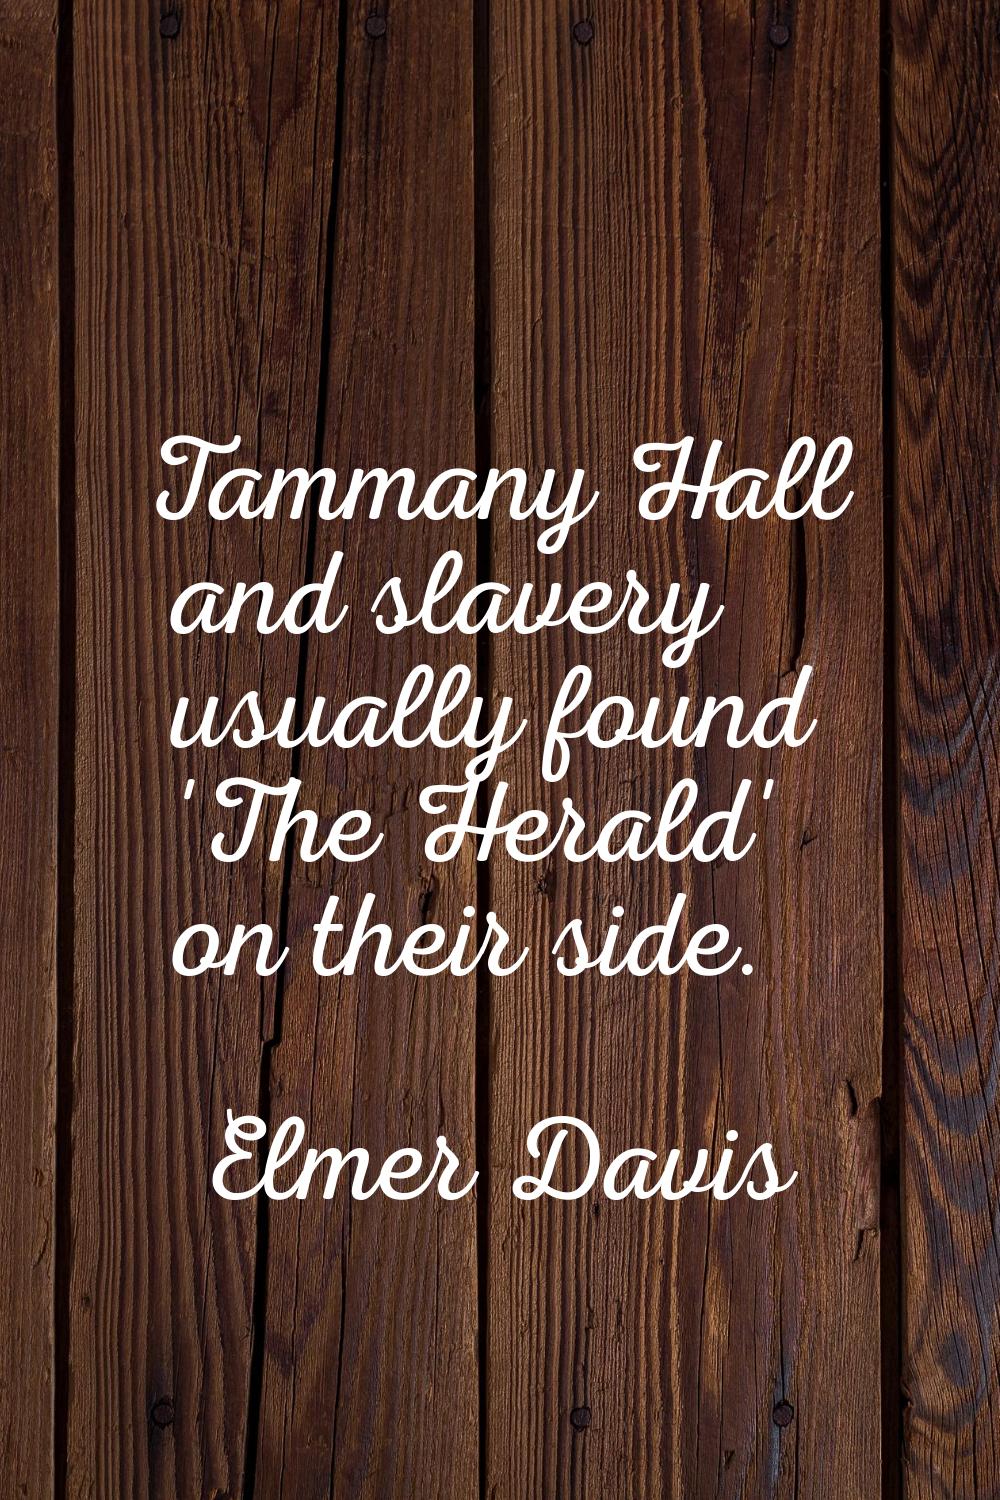 Tammany Hall and slavery usually found 'The Herald' on their side.